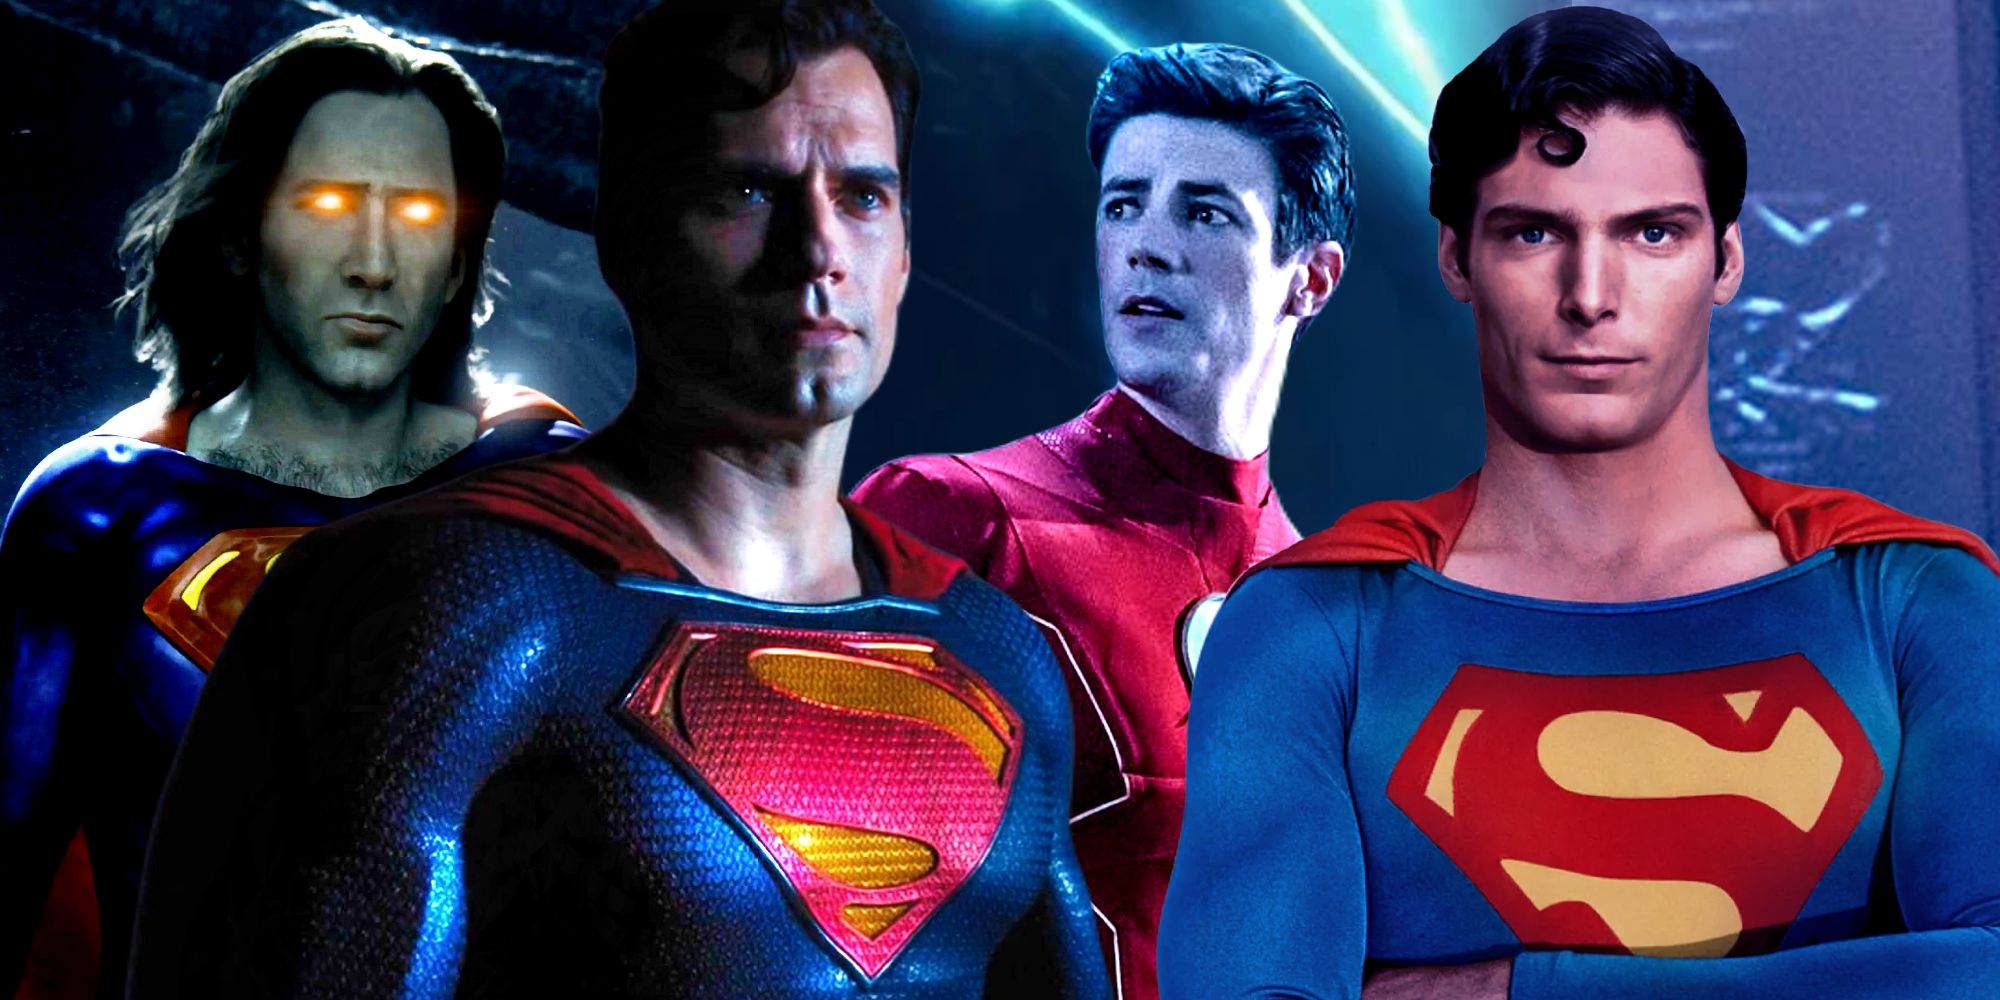 Nicolas Cage, Christopher Reeve, and Henry Cavill as Superman in The Flash with Grant Gustin's Barry Allen